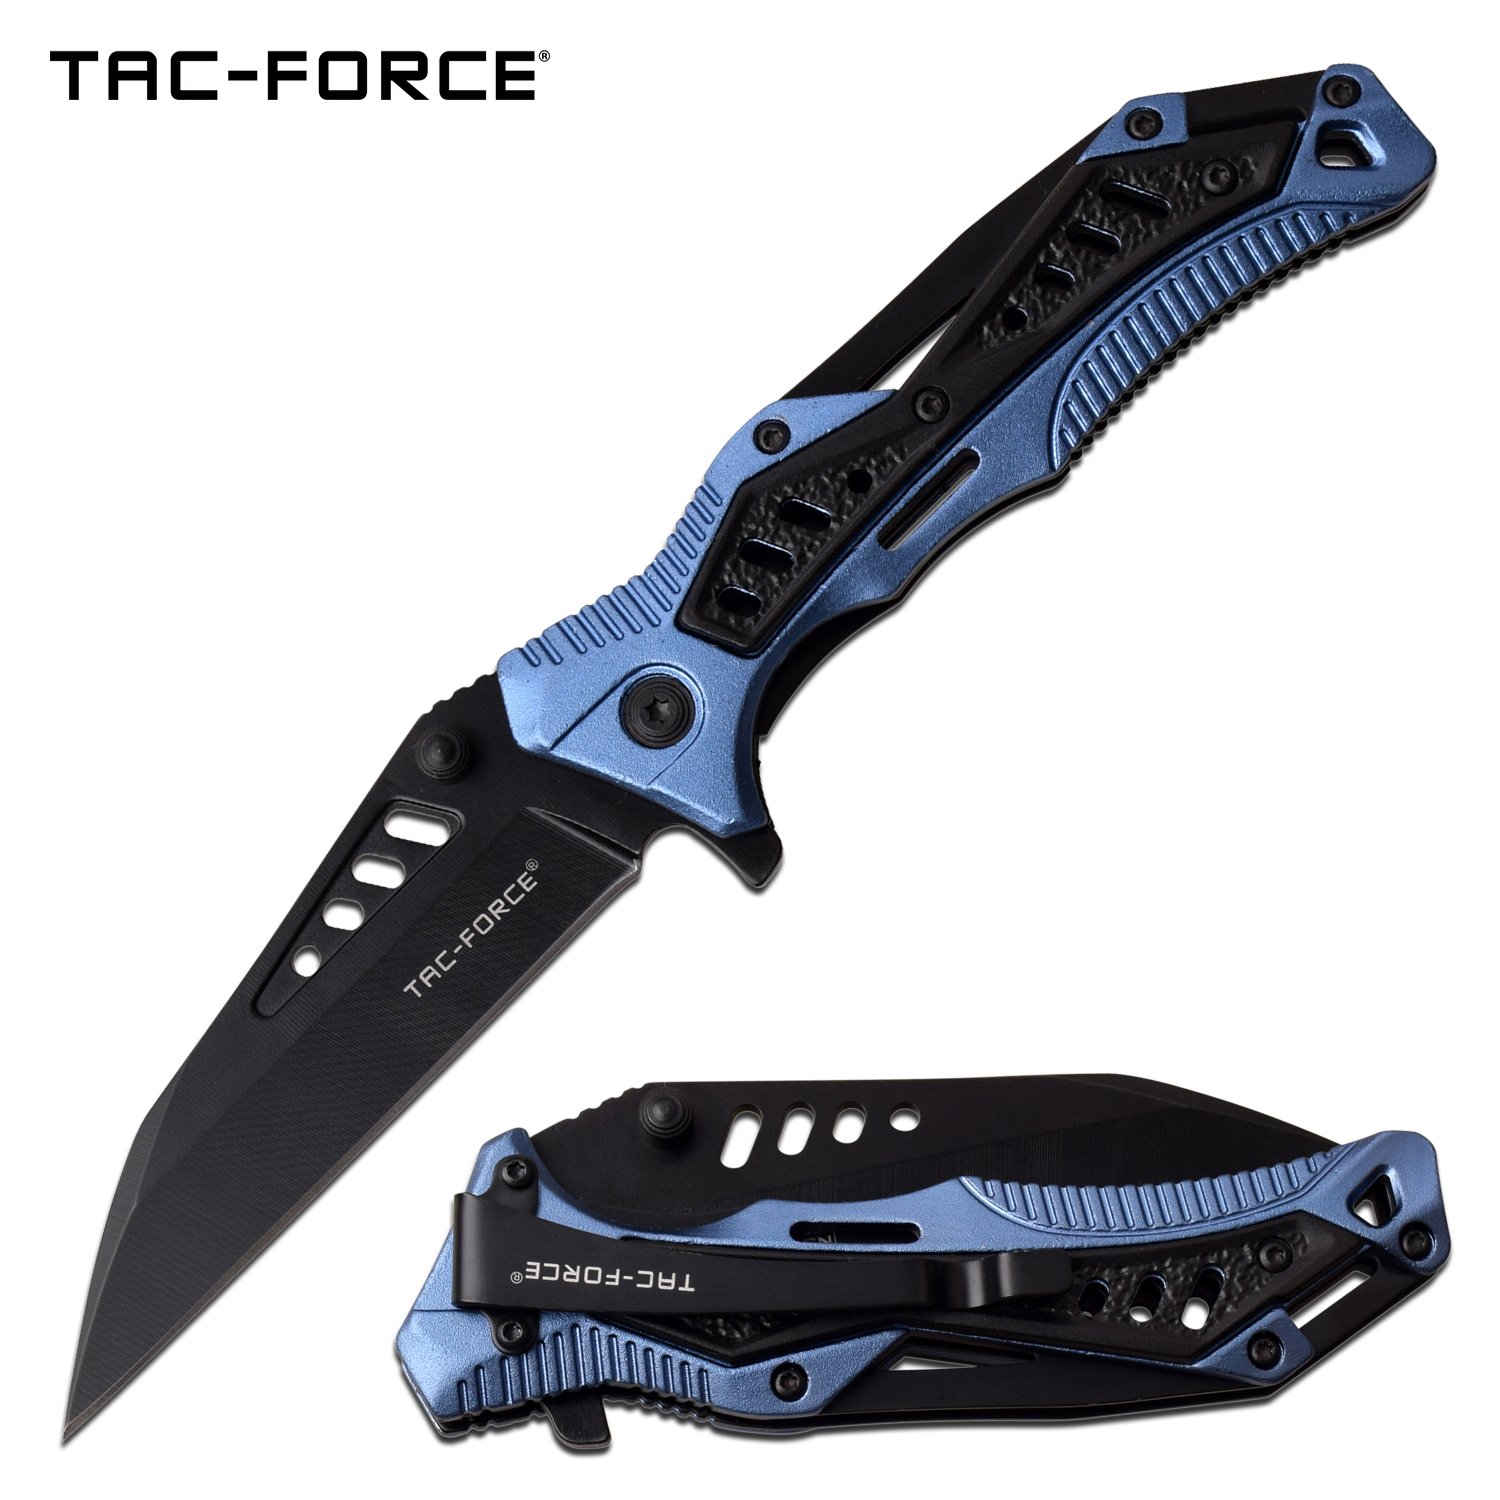 Spring-Assist Folding Knife Tac-Force Black Wharncliffe Blade EDC Tactical Blue